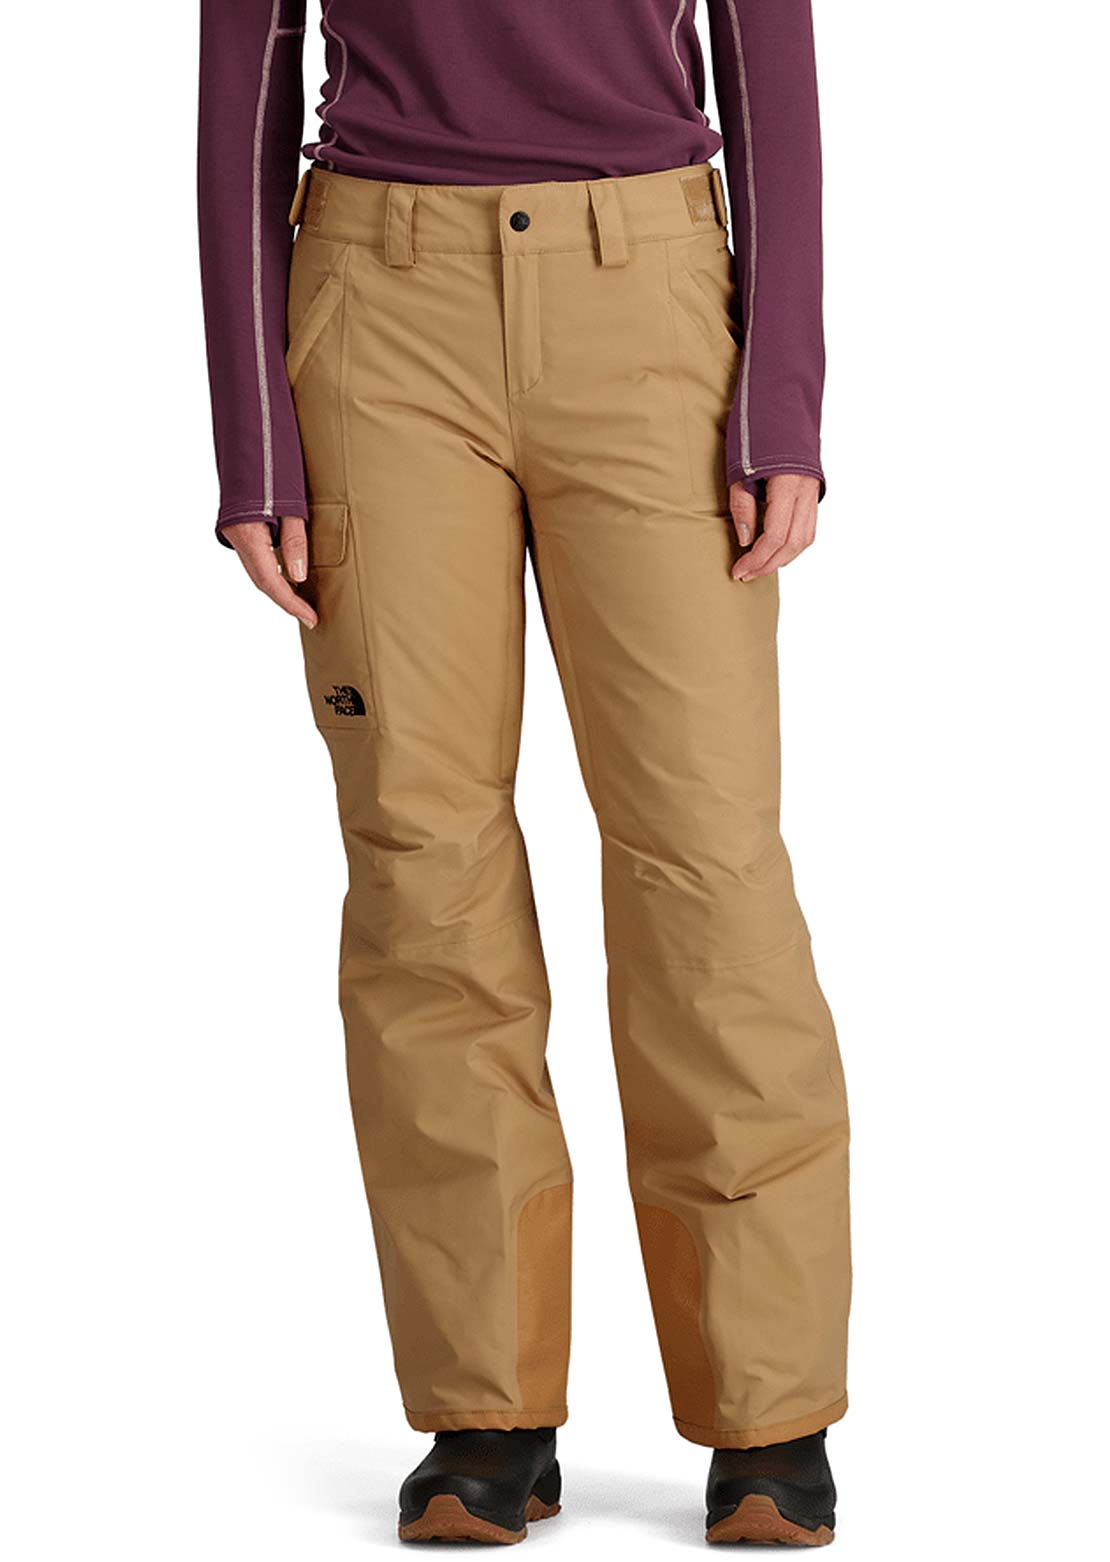 The North Face Women's Freedom Insulated Regular Pants - PRFO Sports